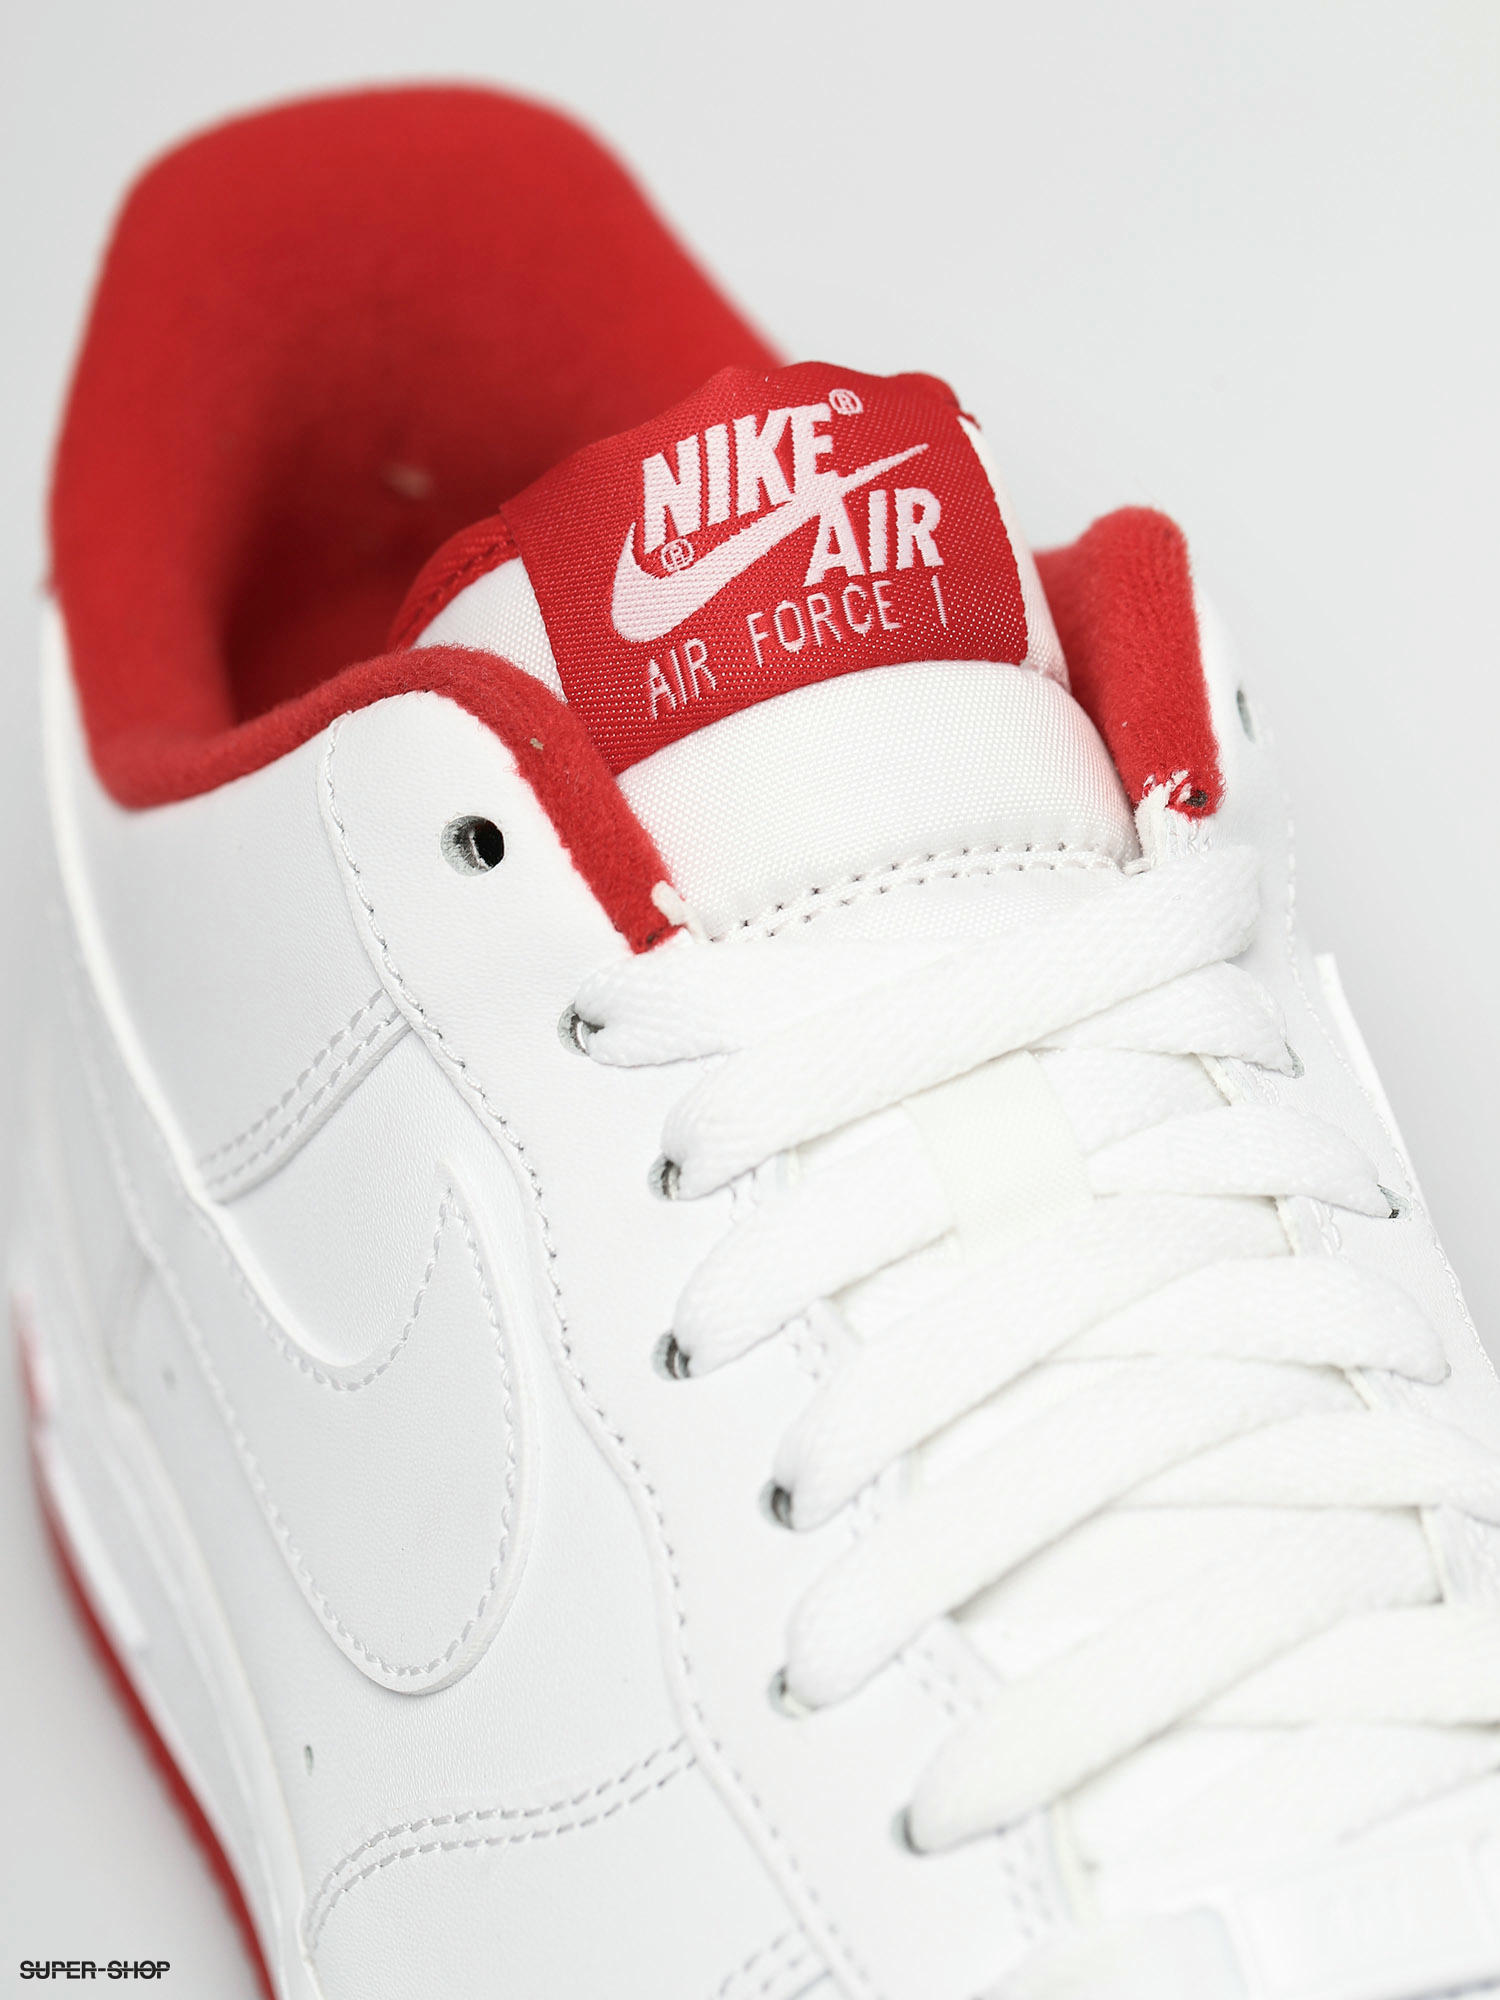 Air Force 1 Low 'University Red' - Nike - CD0884 101 - white/university red